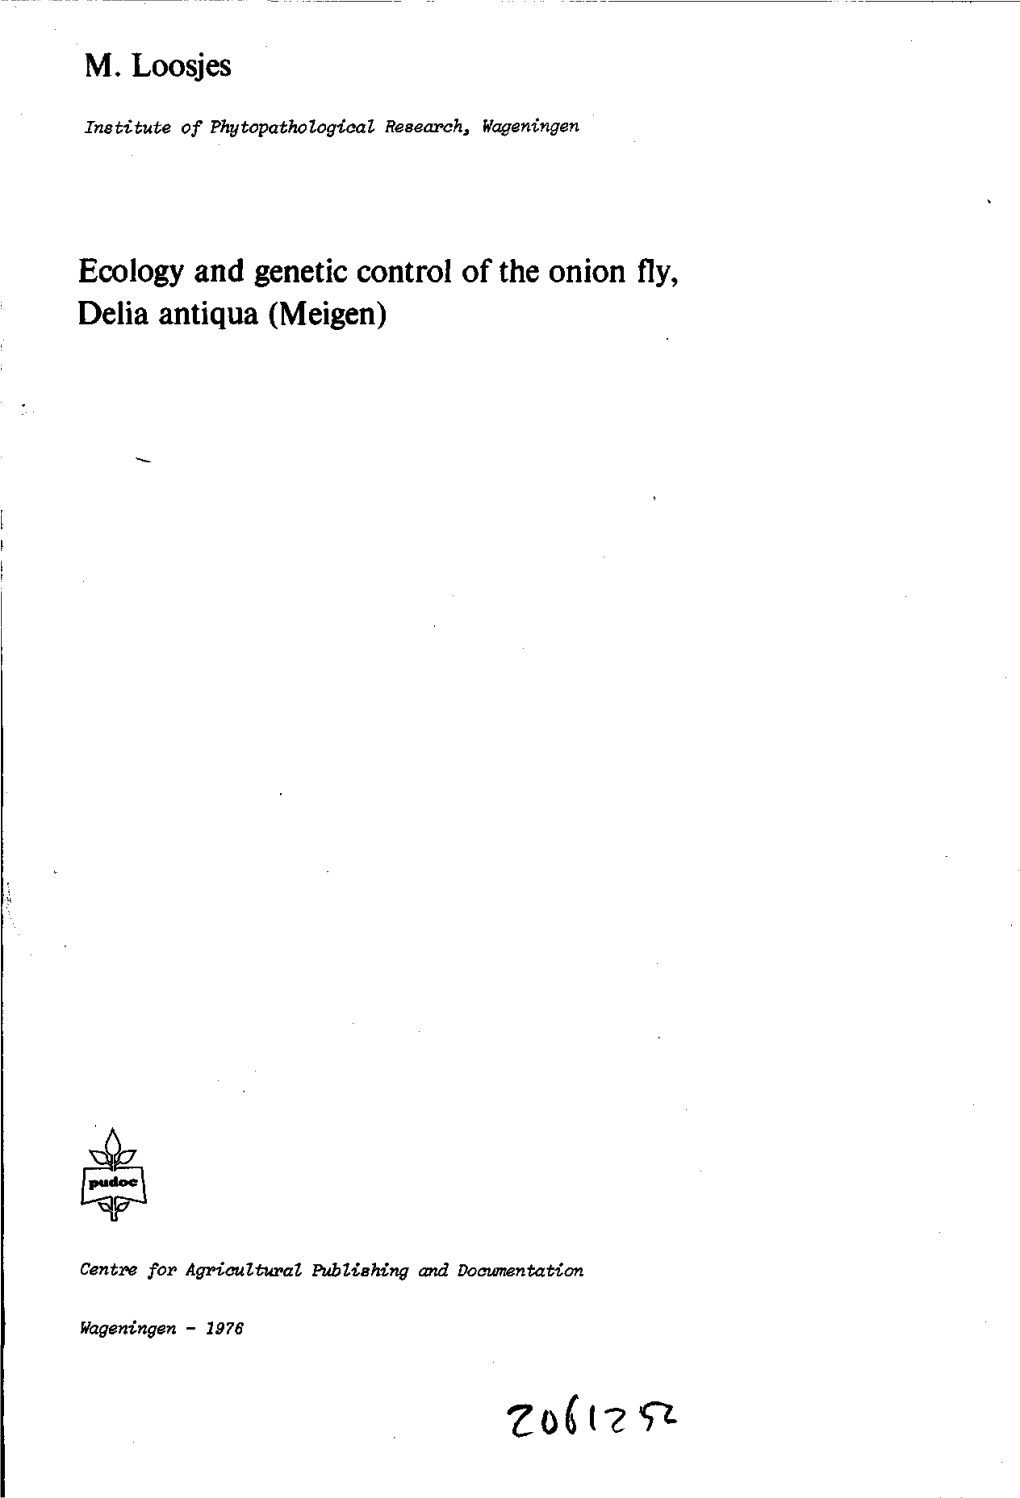 Ecology and Genetic Control of the Onion Fly, Delia